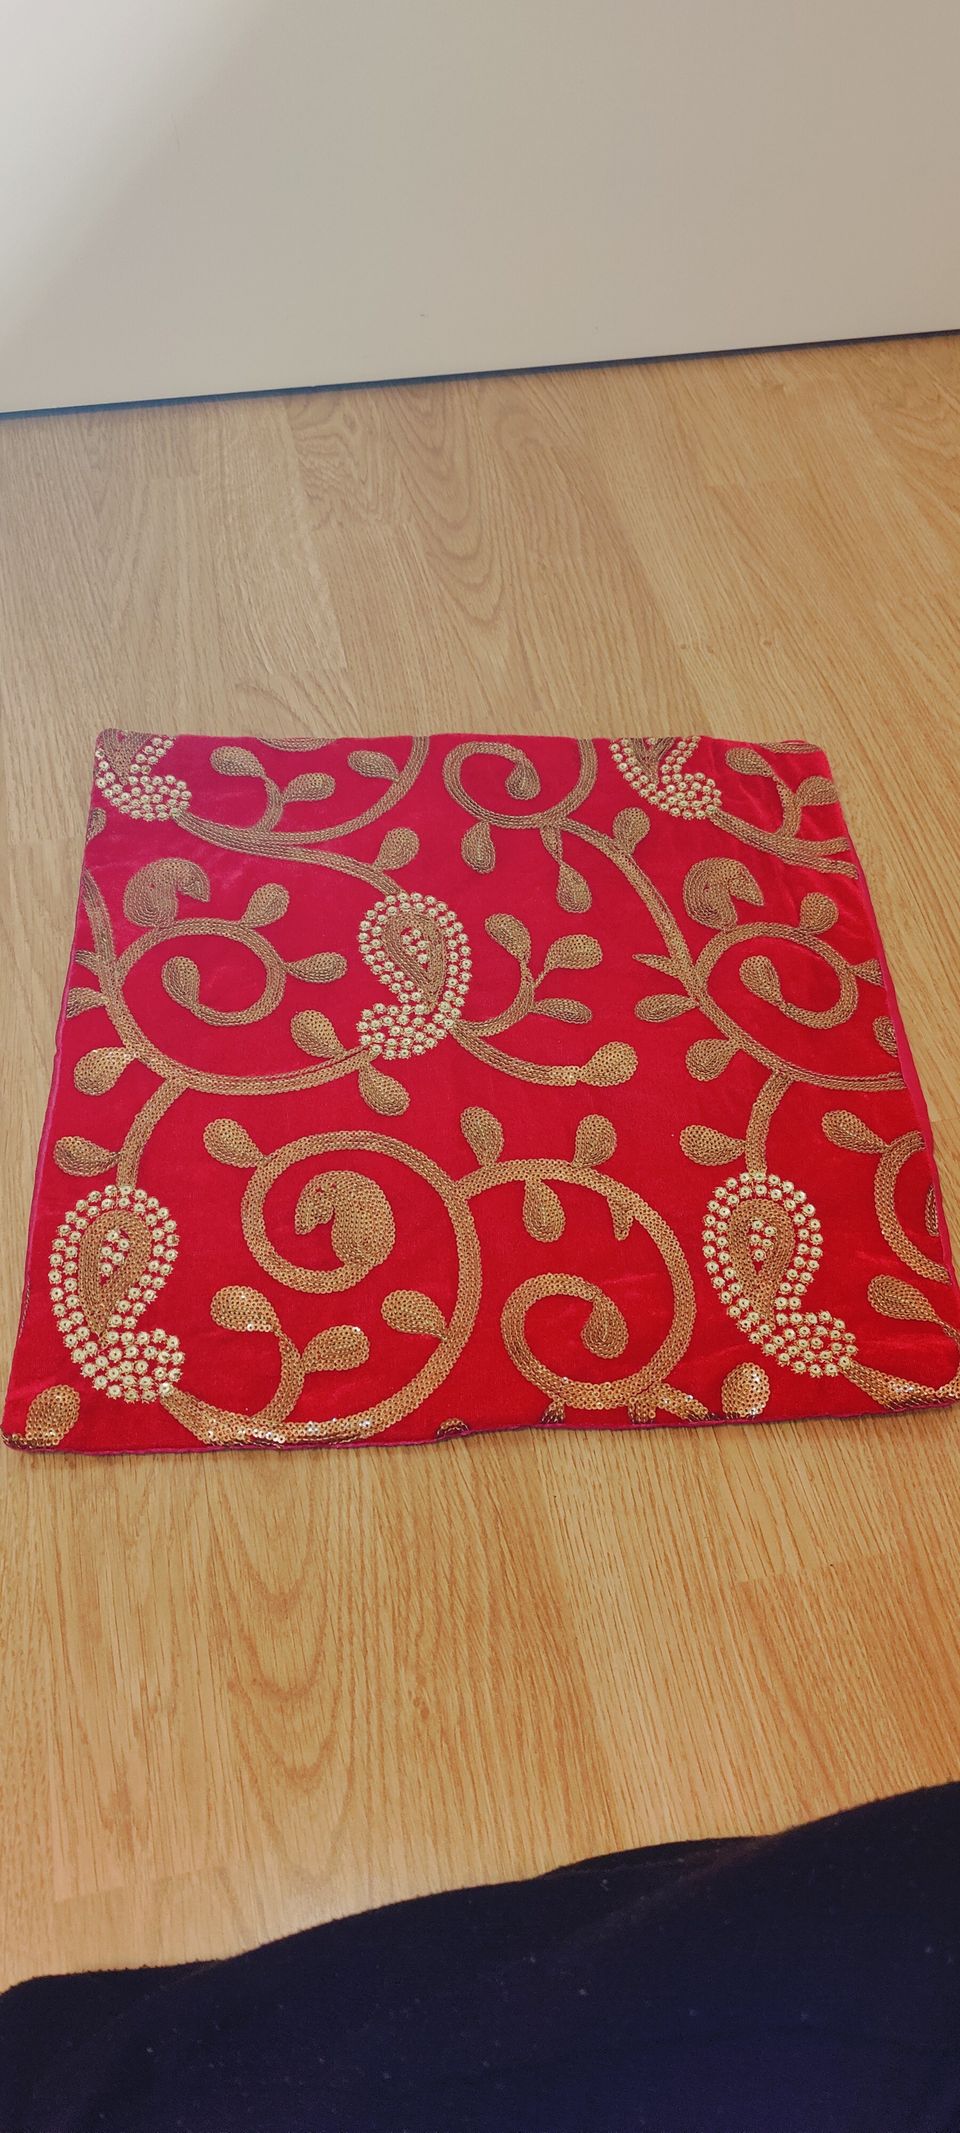 Beautiful Cushion Cover for Sale!